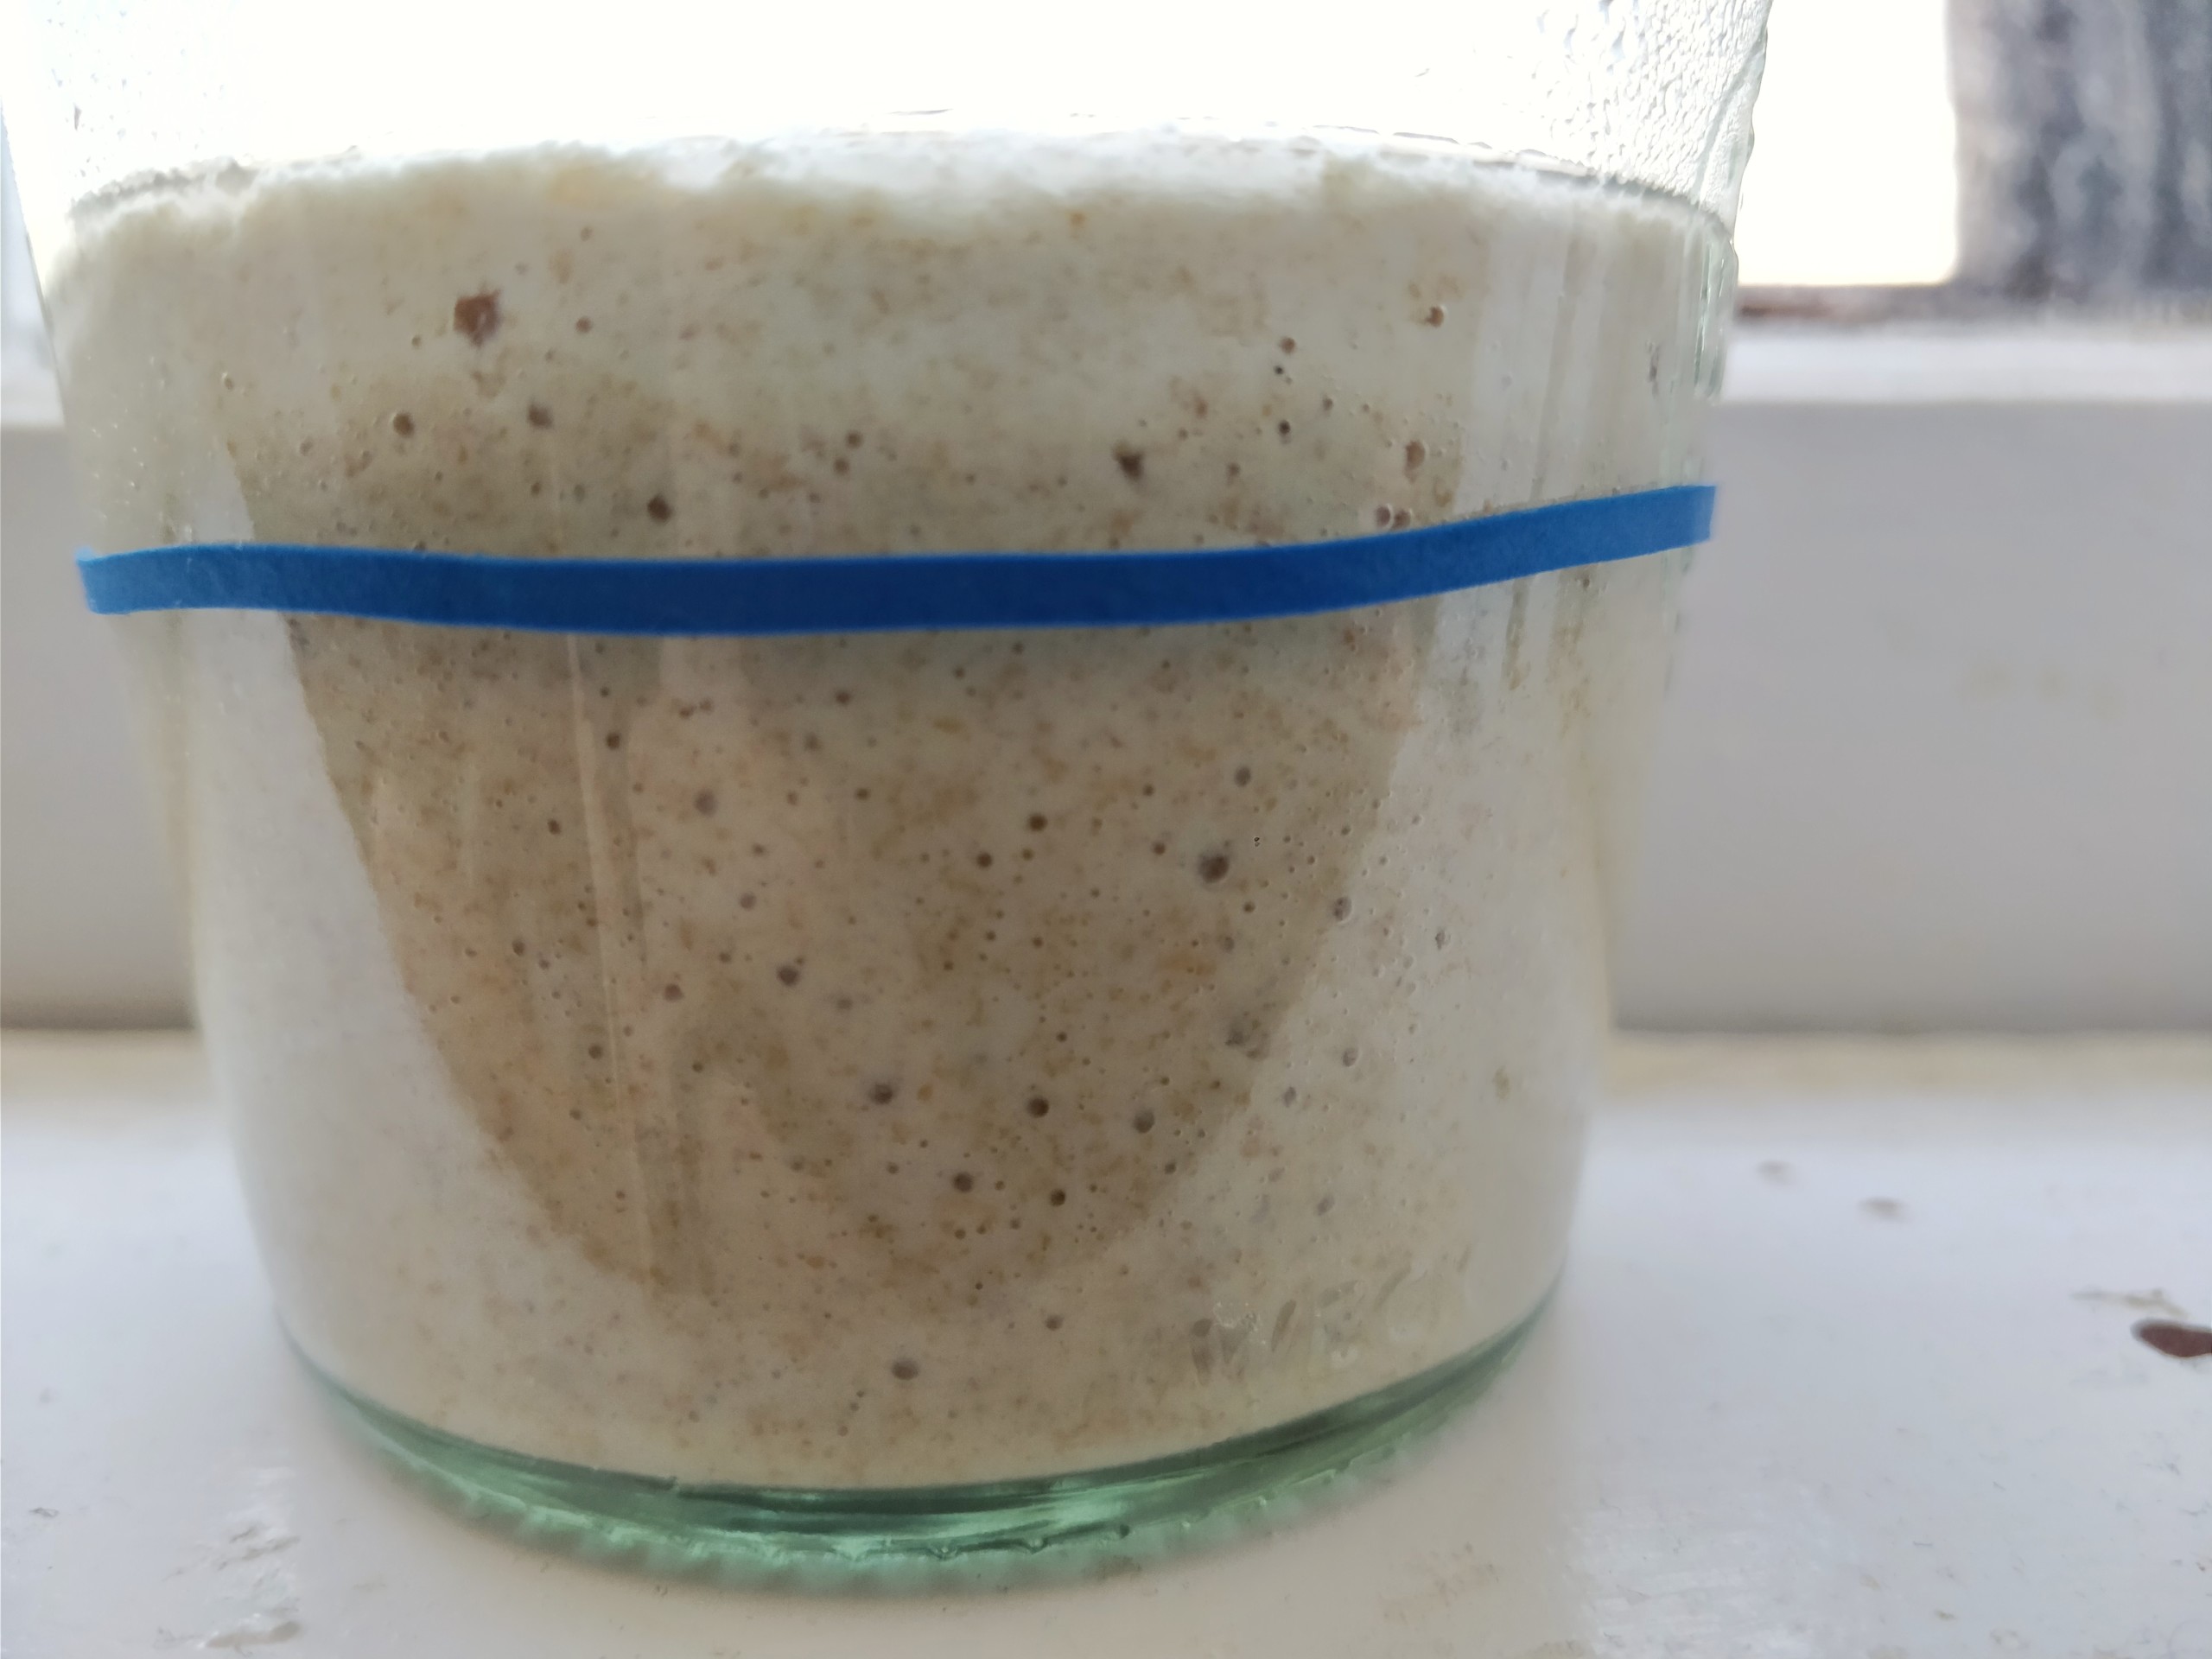 Closeup of sourdough starter from the side of the jar reveals tiny bubbles.